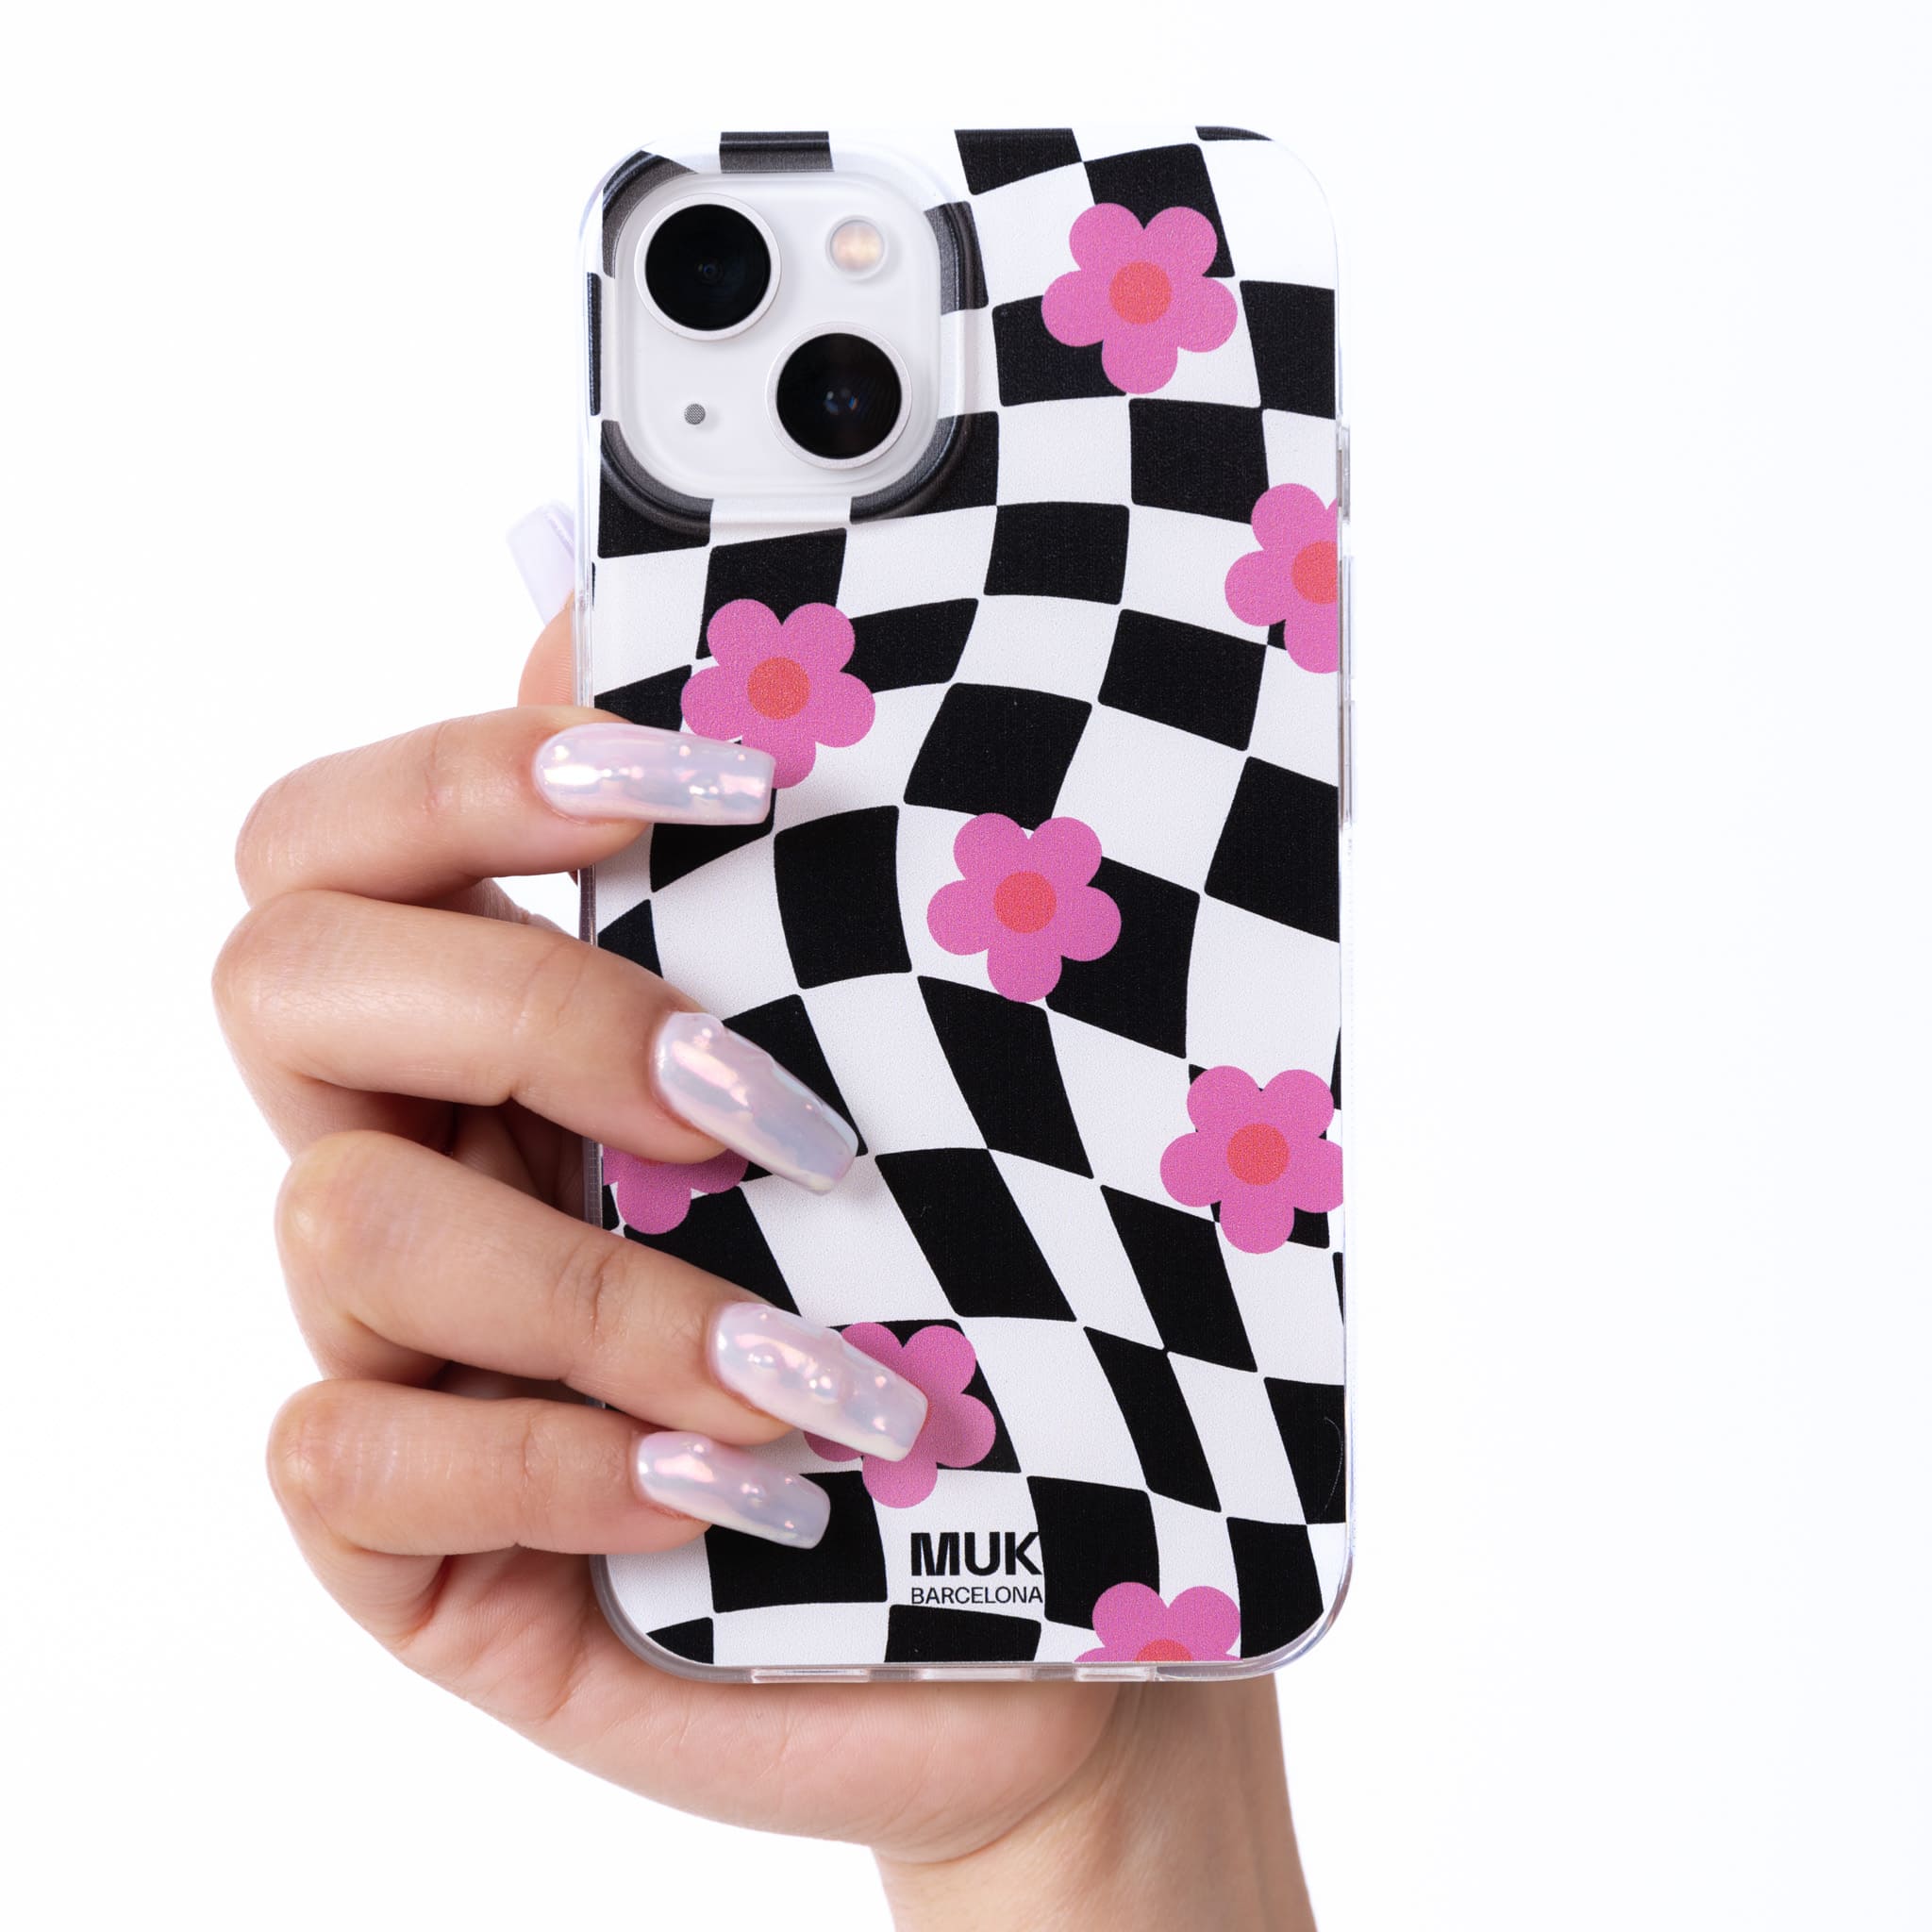 Clear case with chess design and pink flowers
